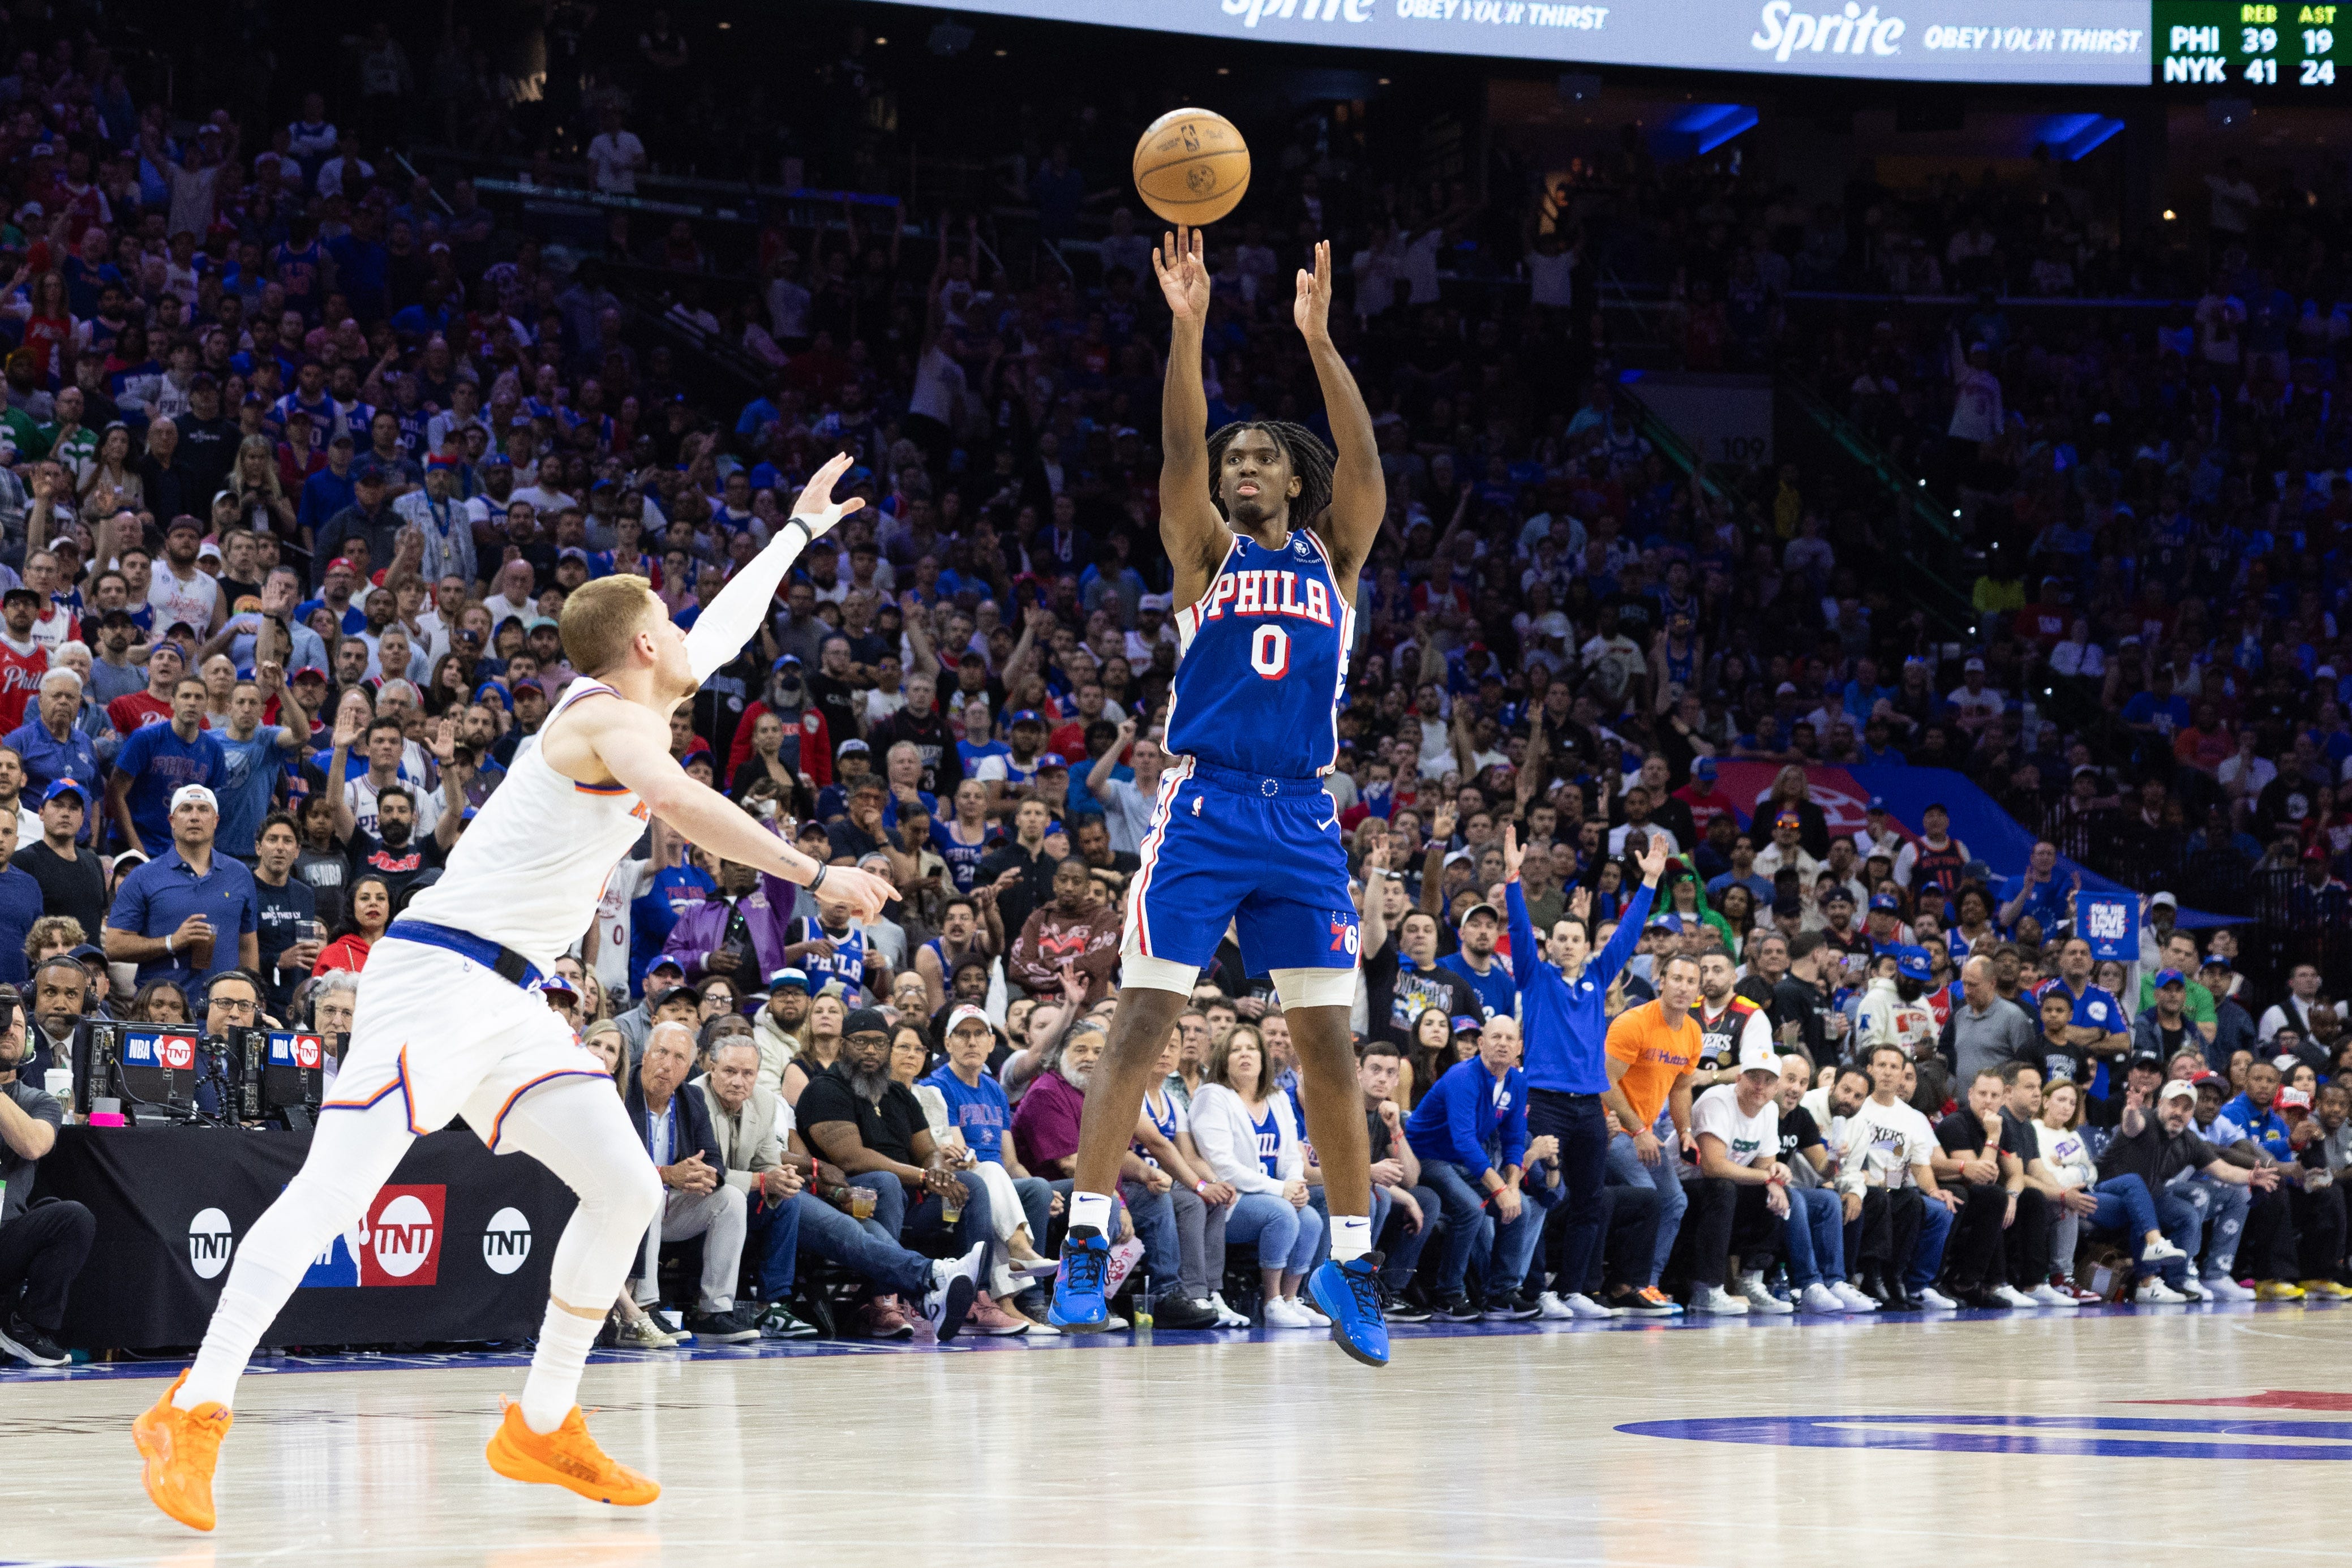 paul reed evaluates his season, feels the need to grow more for sixers